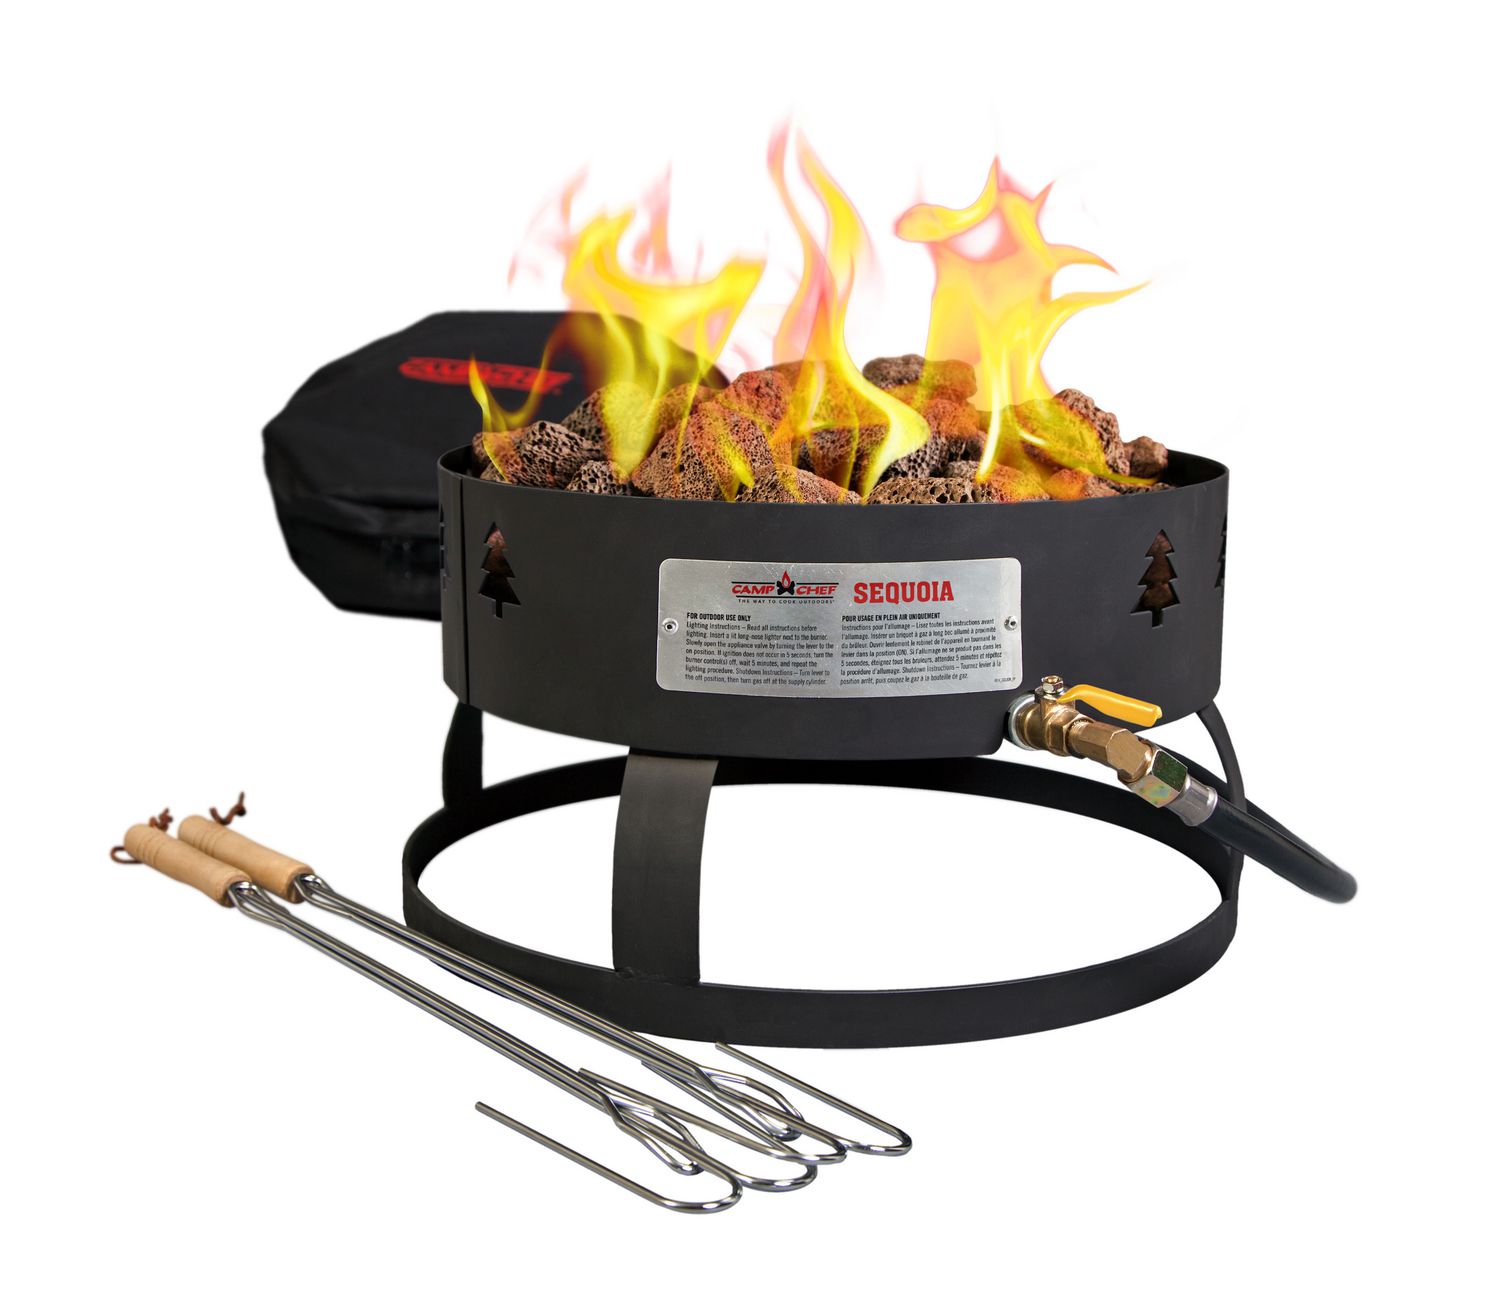 Camp Chef Sequoia Propane Fire Pit, Outdoor Propane Fire Pit Canada